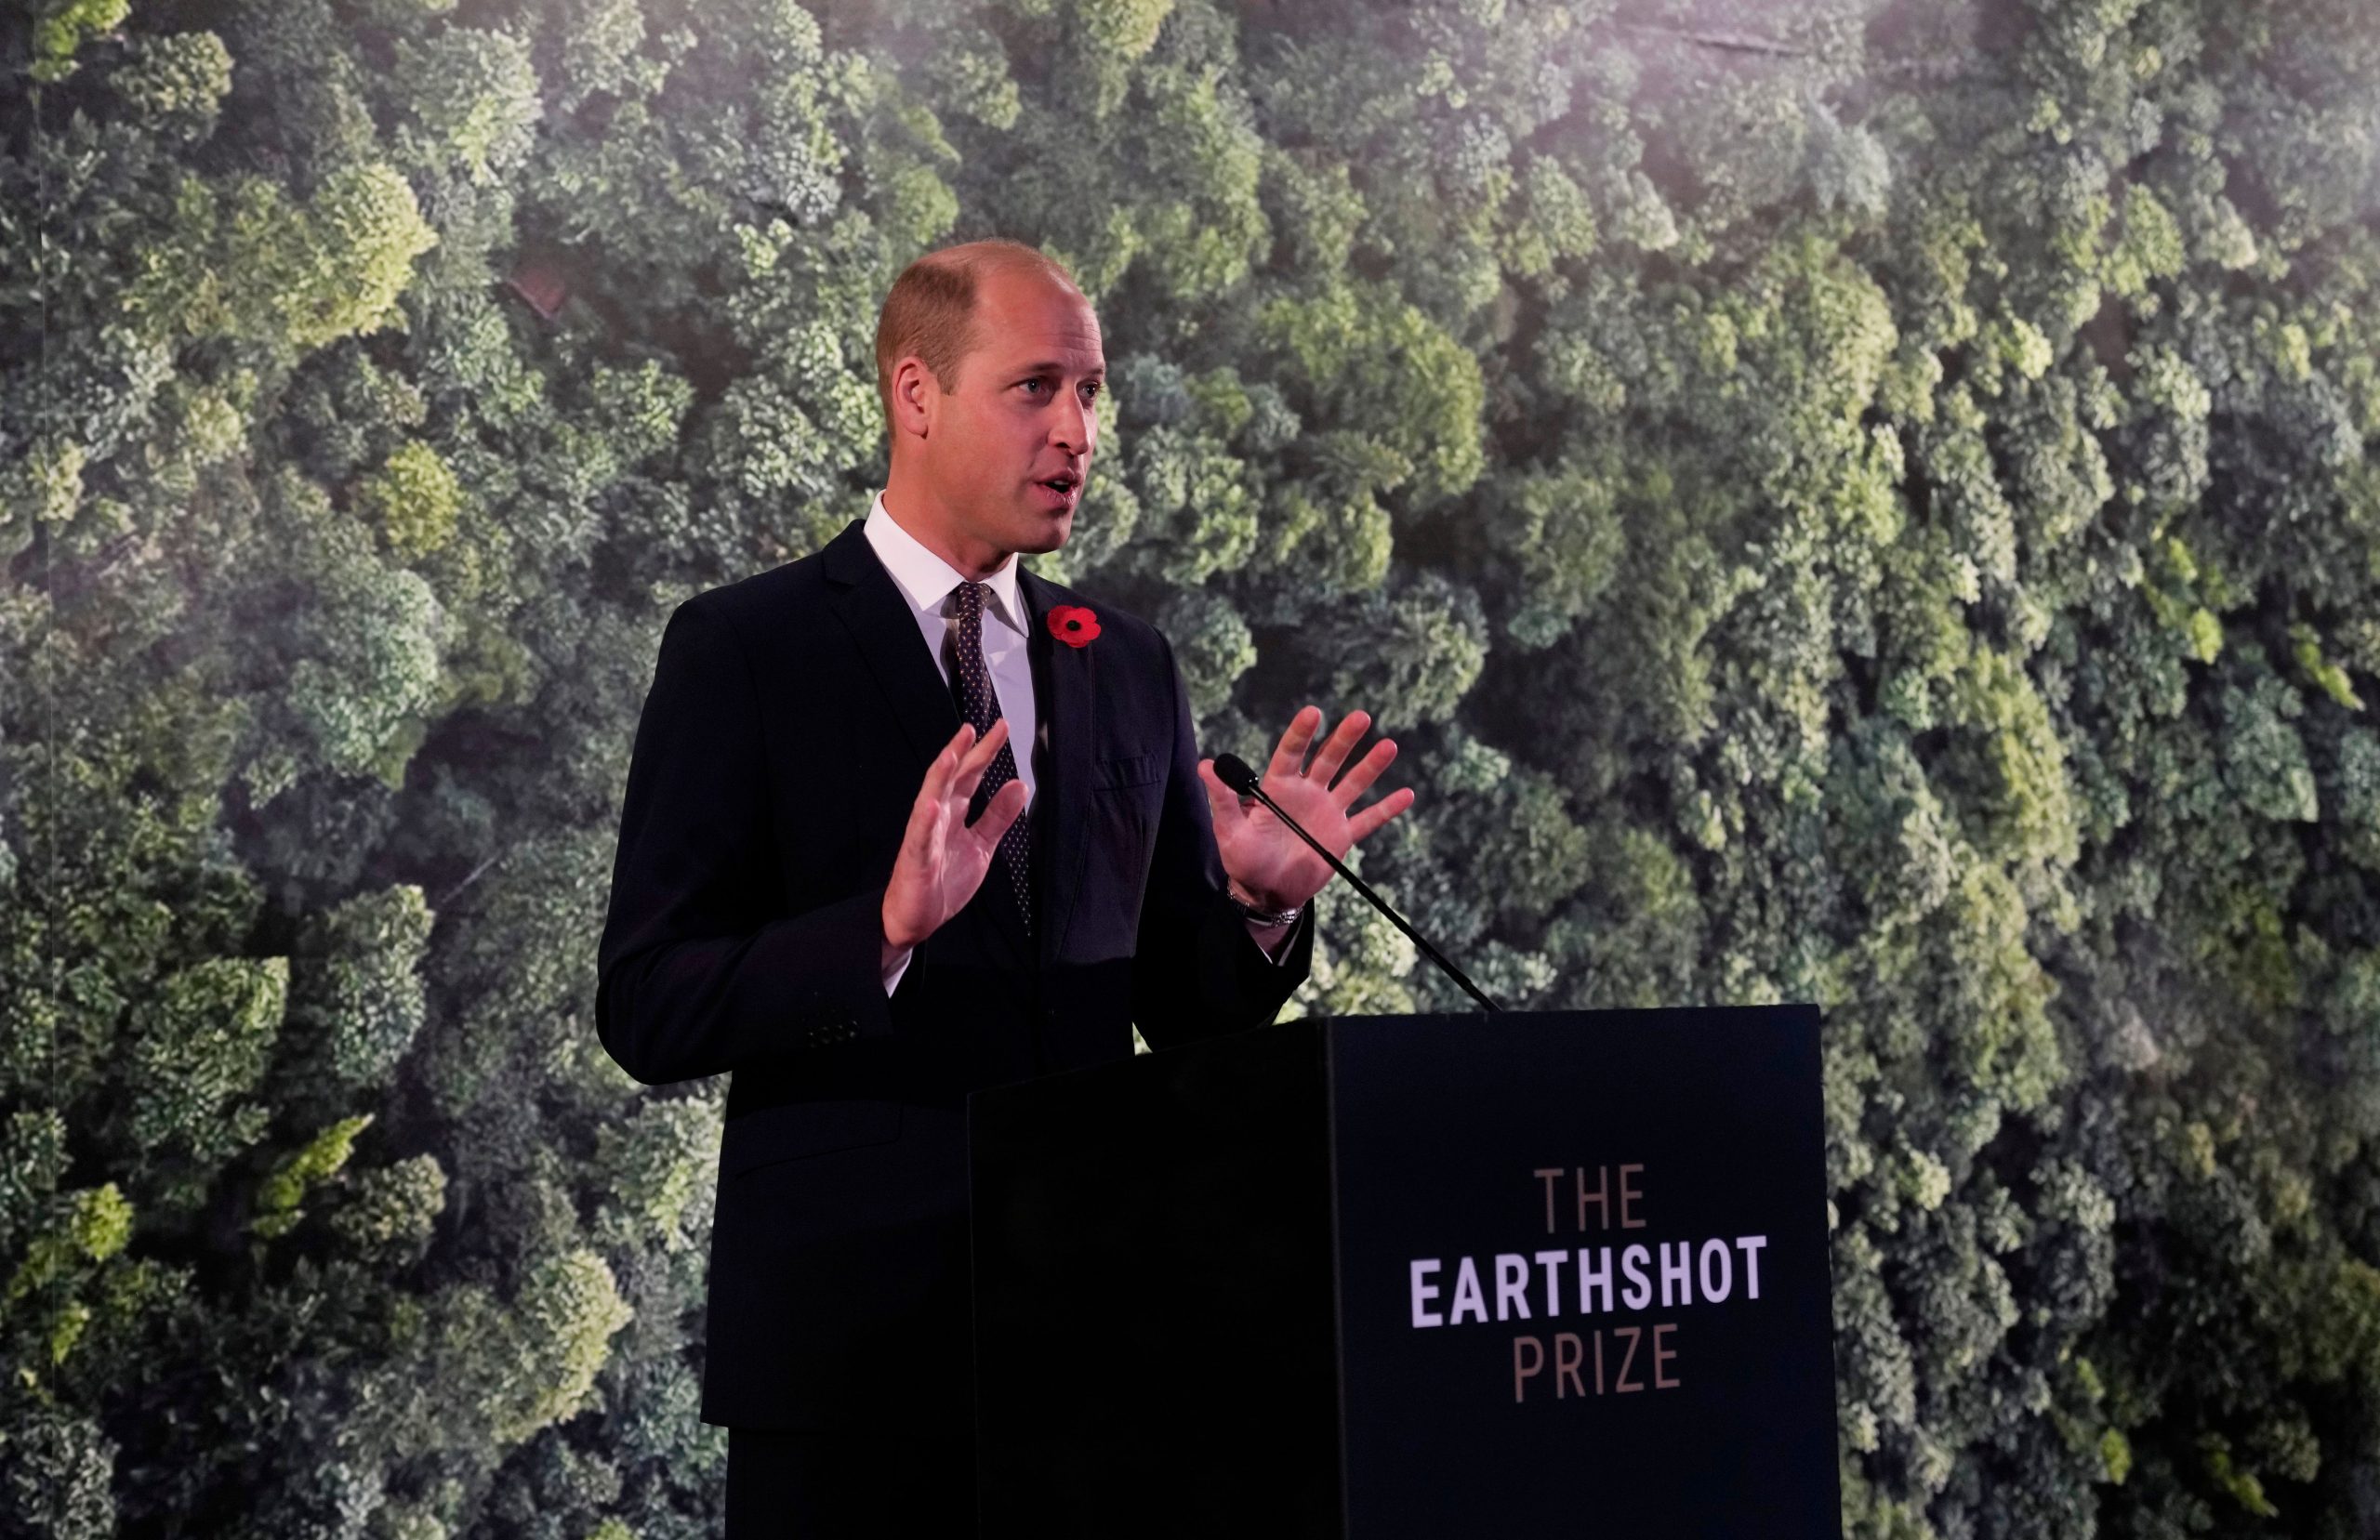 Prince William charity that funds Earthshot Prize invests in bank tied to fossil fuels: Report